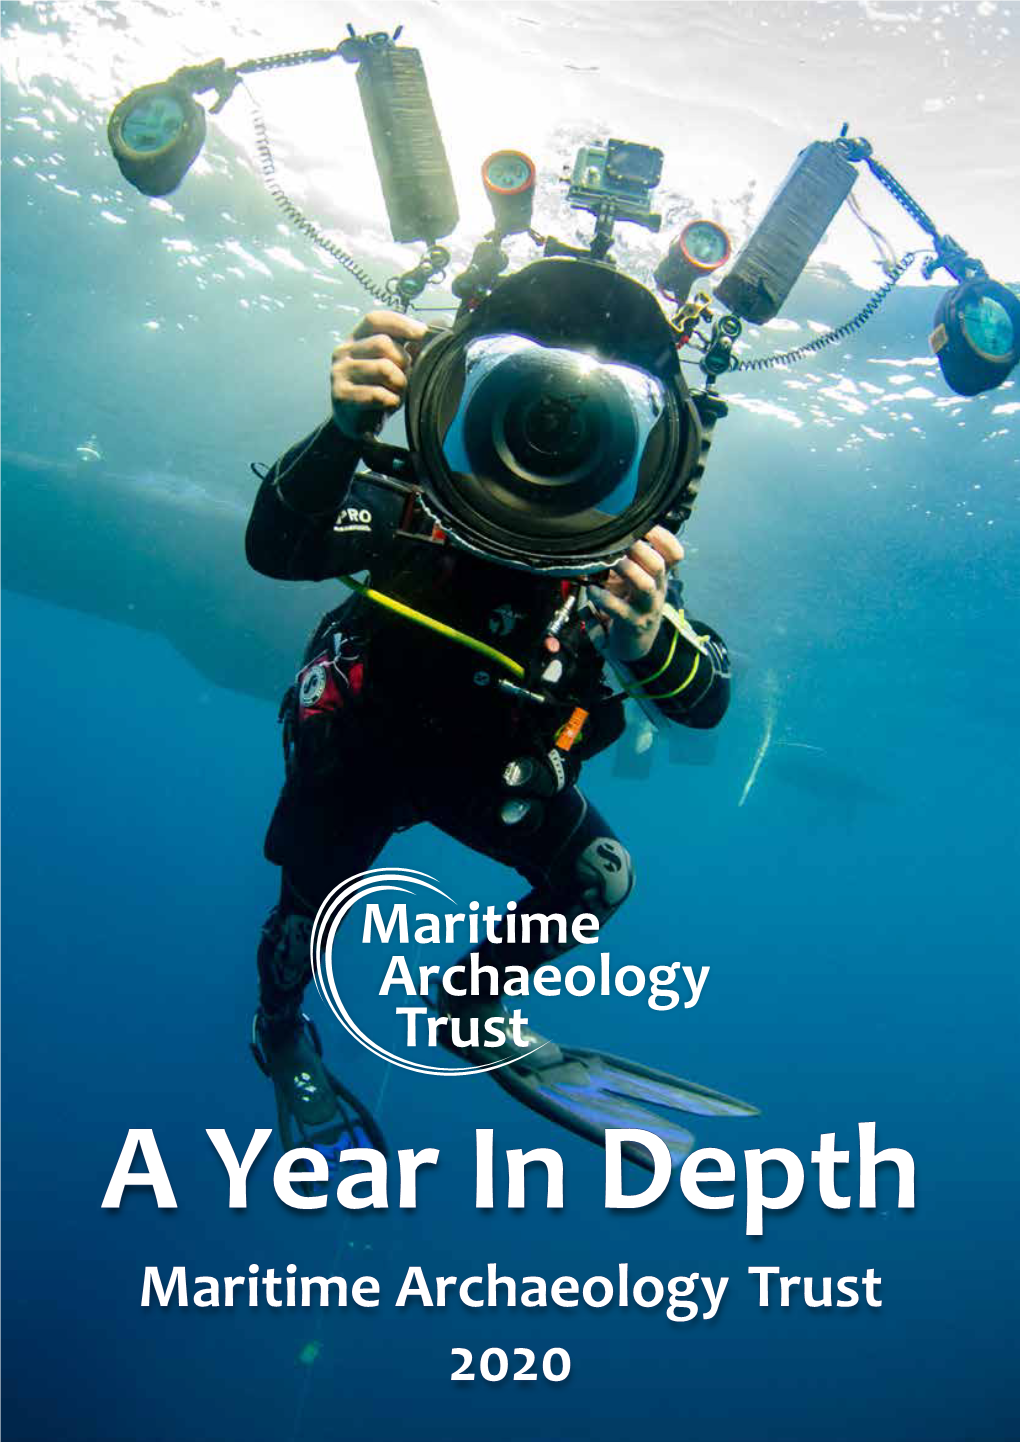 Maritime Archaeology Trust 2020 Front Cover: Diver Stéphane Jamme with an Underwater Camera, Captured by MAT Archaeologist Brandon Mason